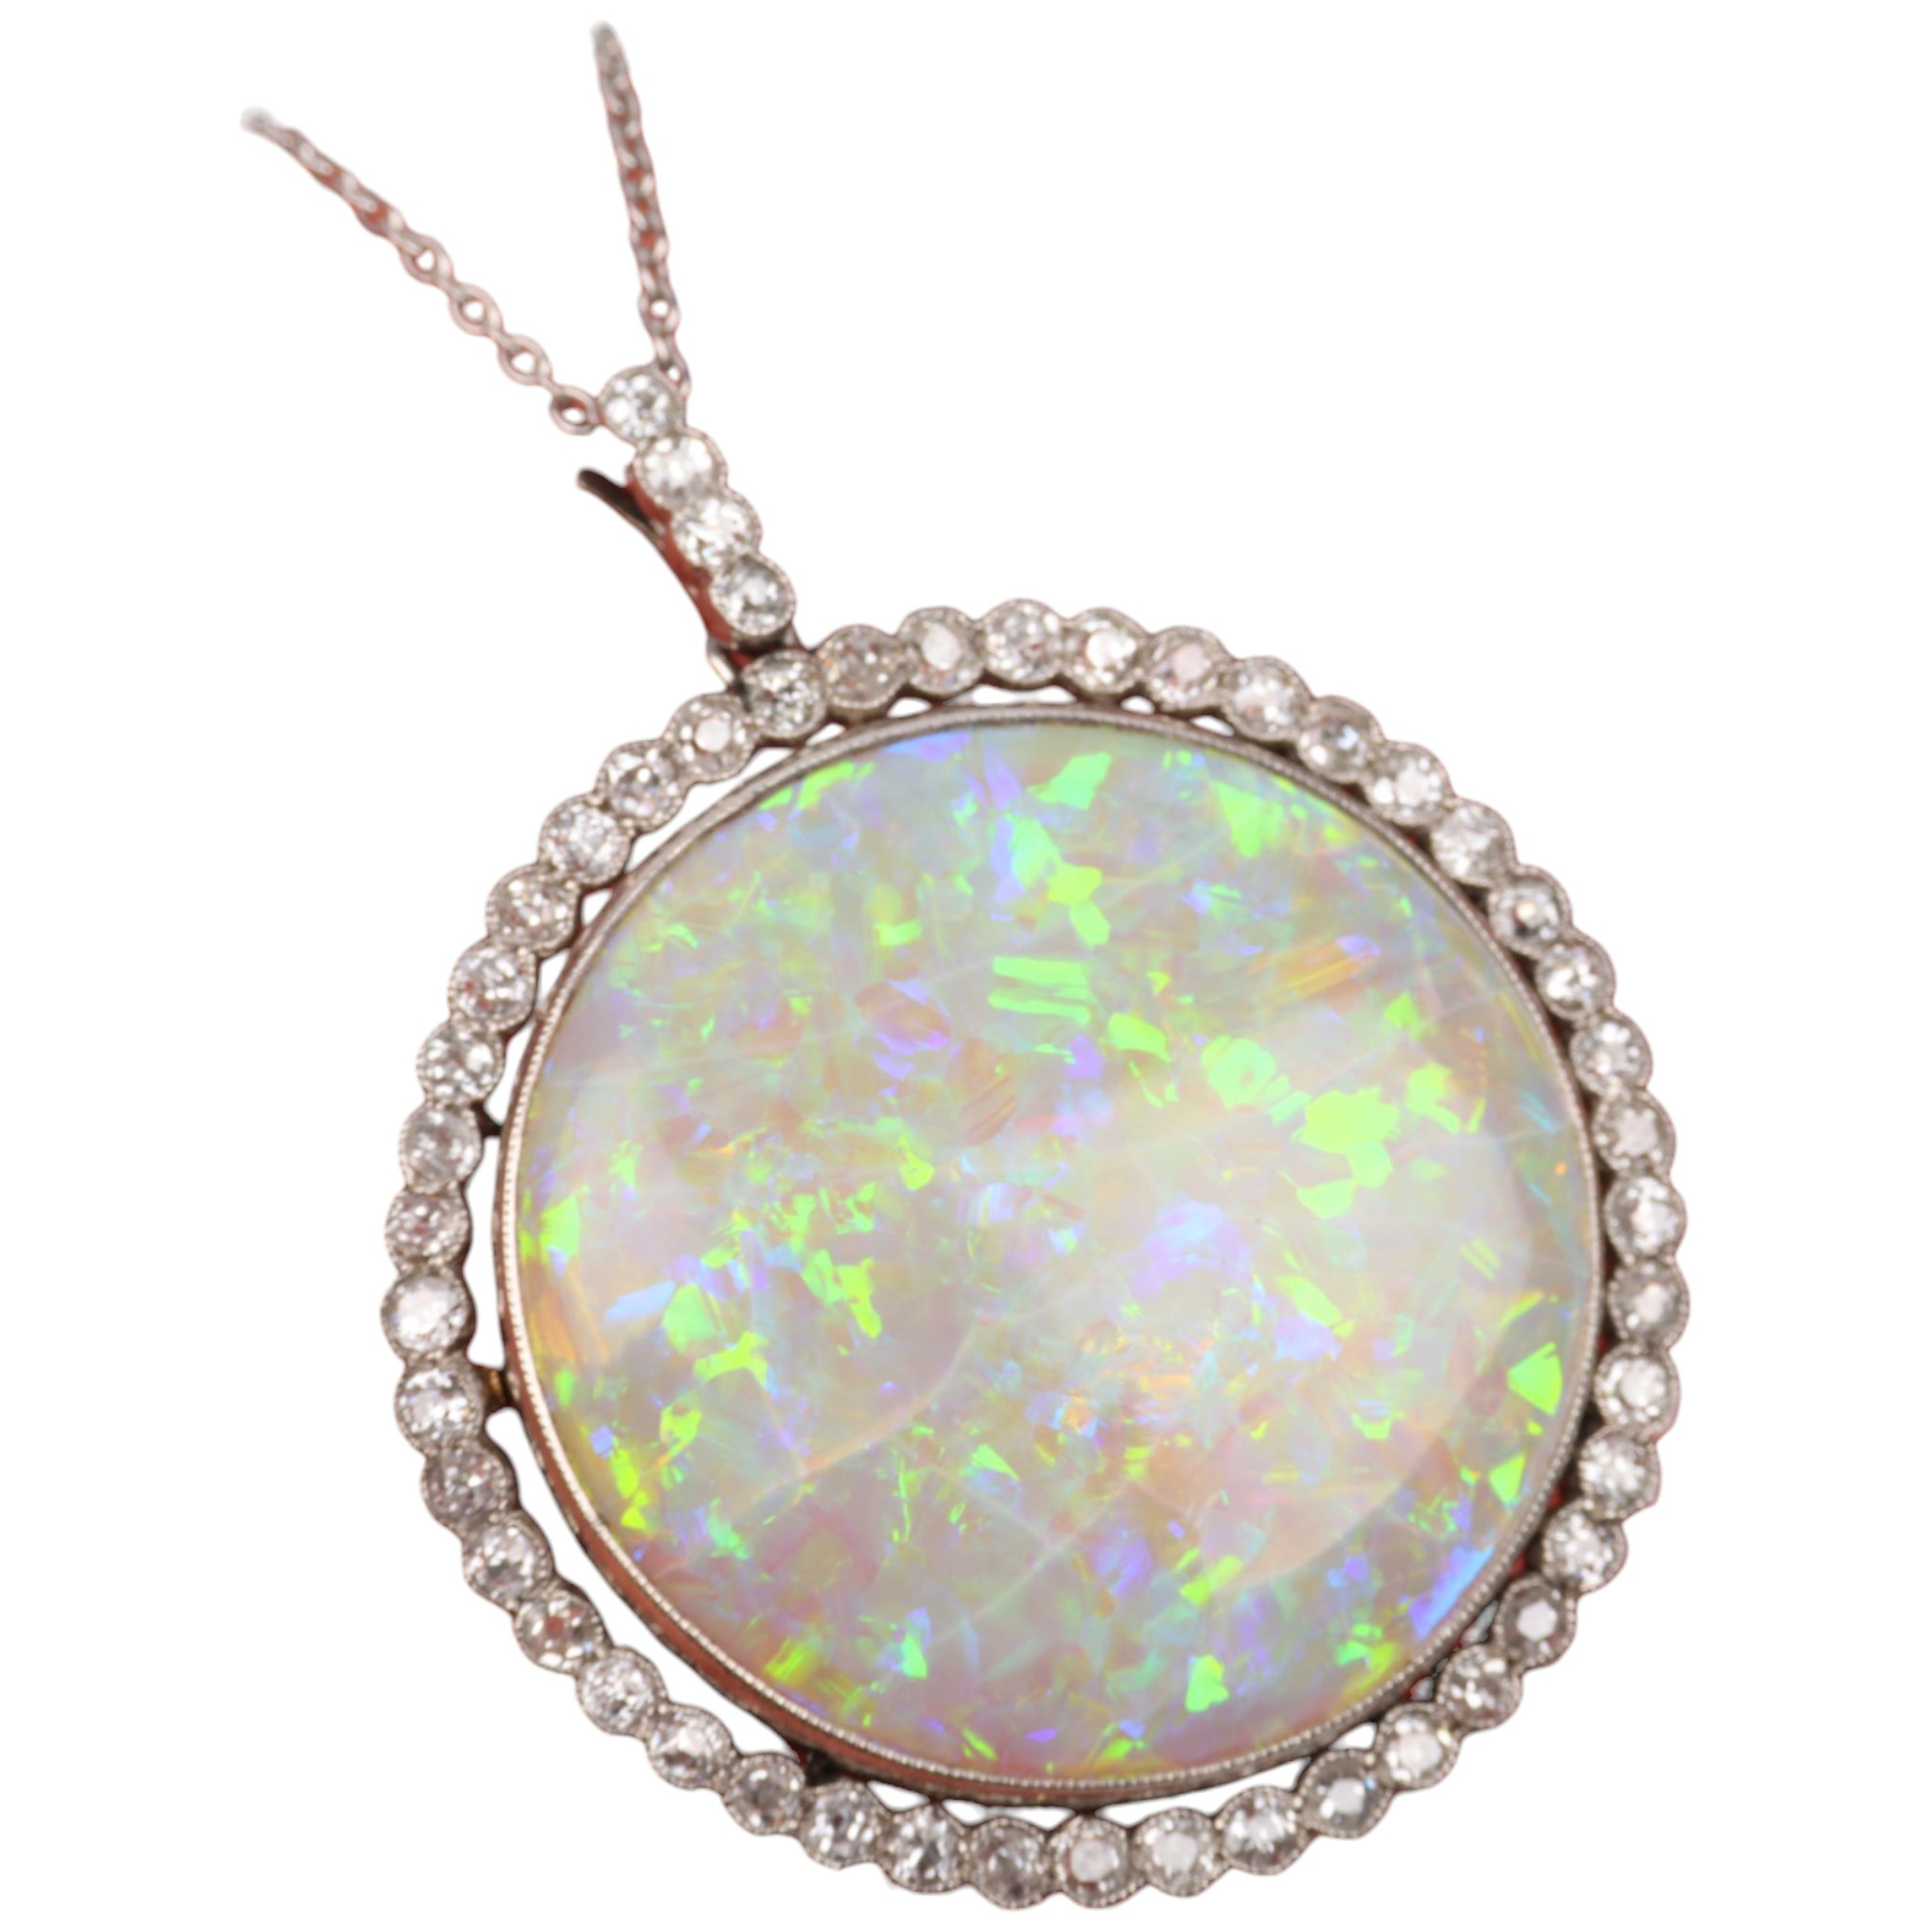 A Belle Epoque opal and diamond cluster pendant necklace, rub-over set with 15ct round cabochon opal